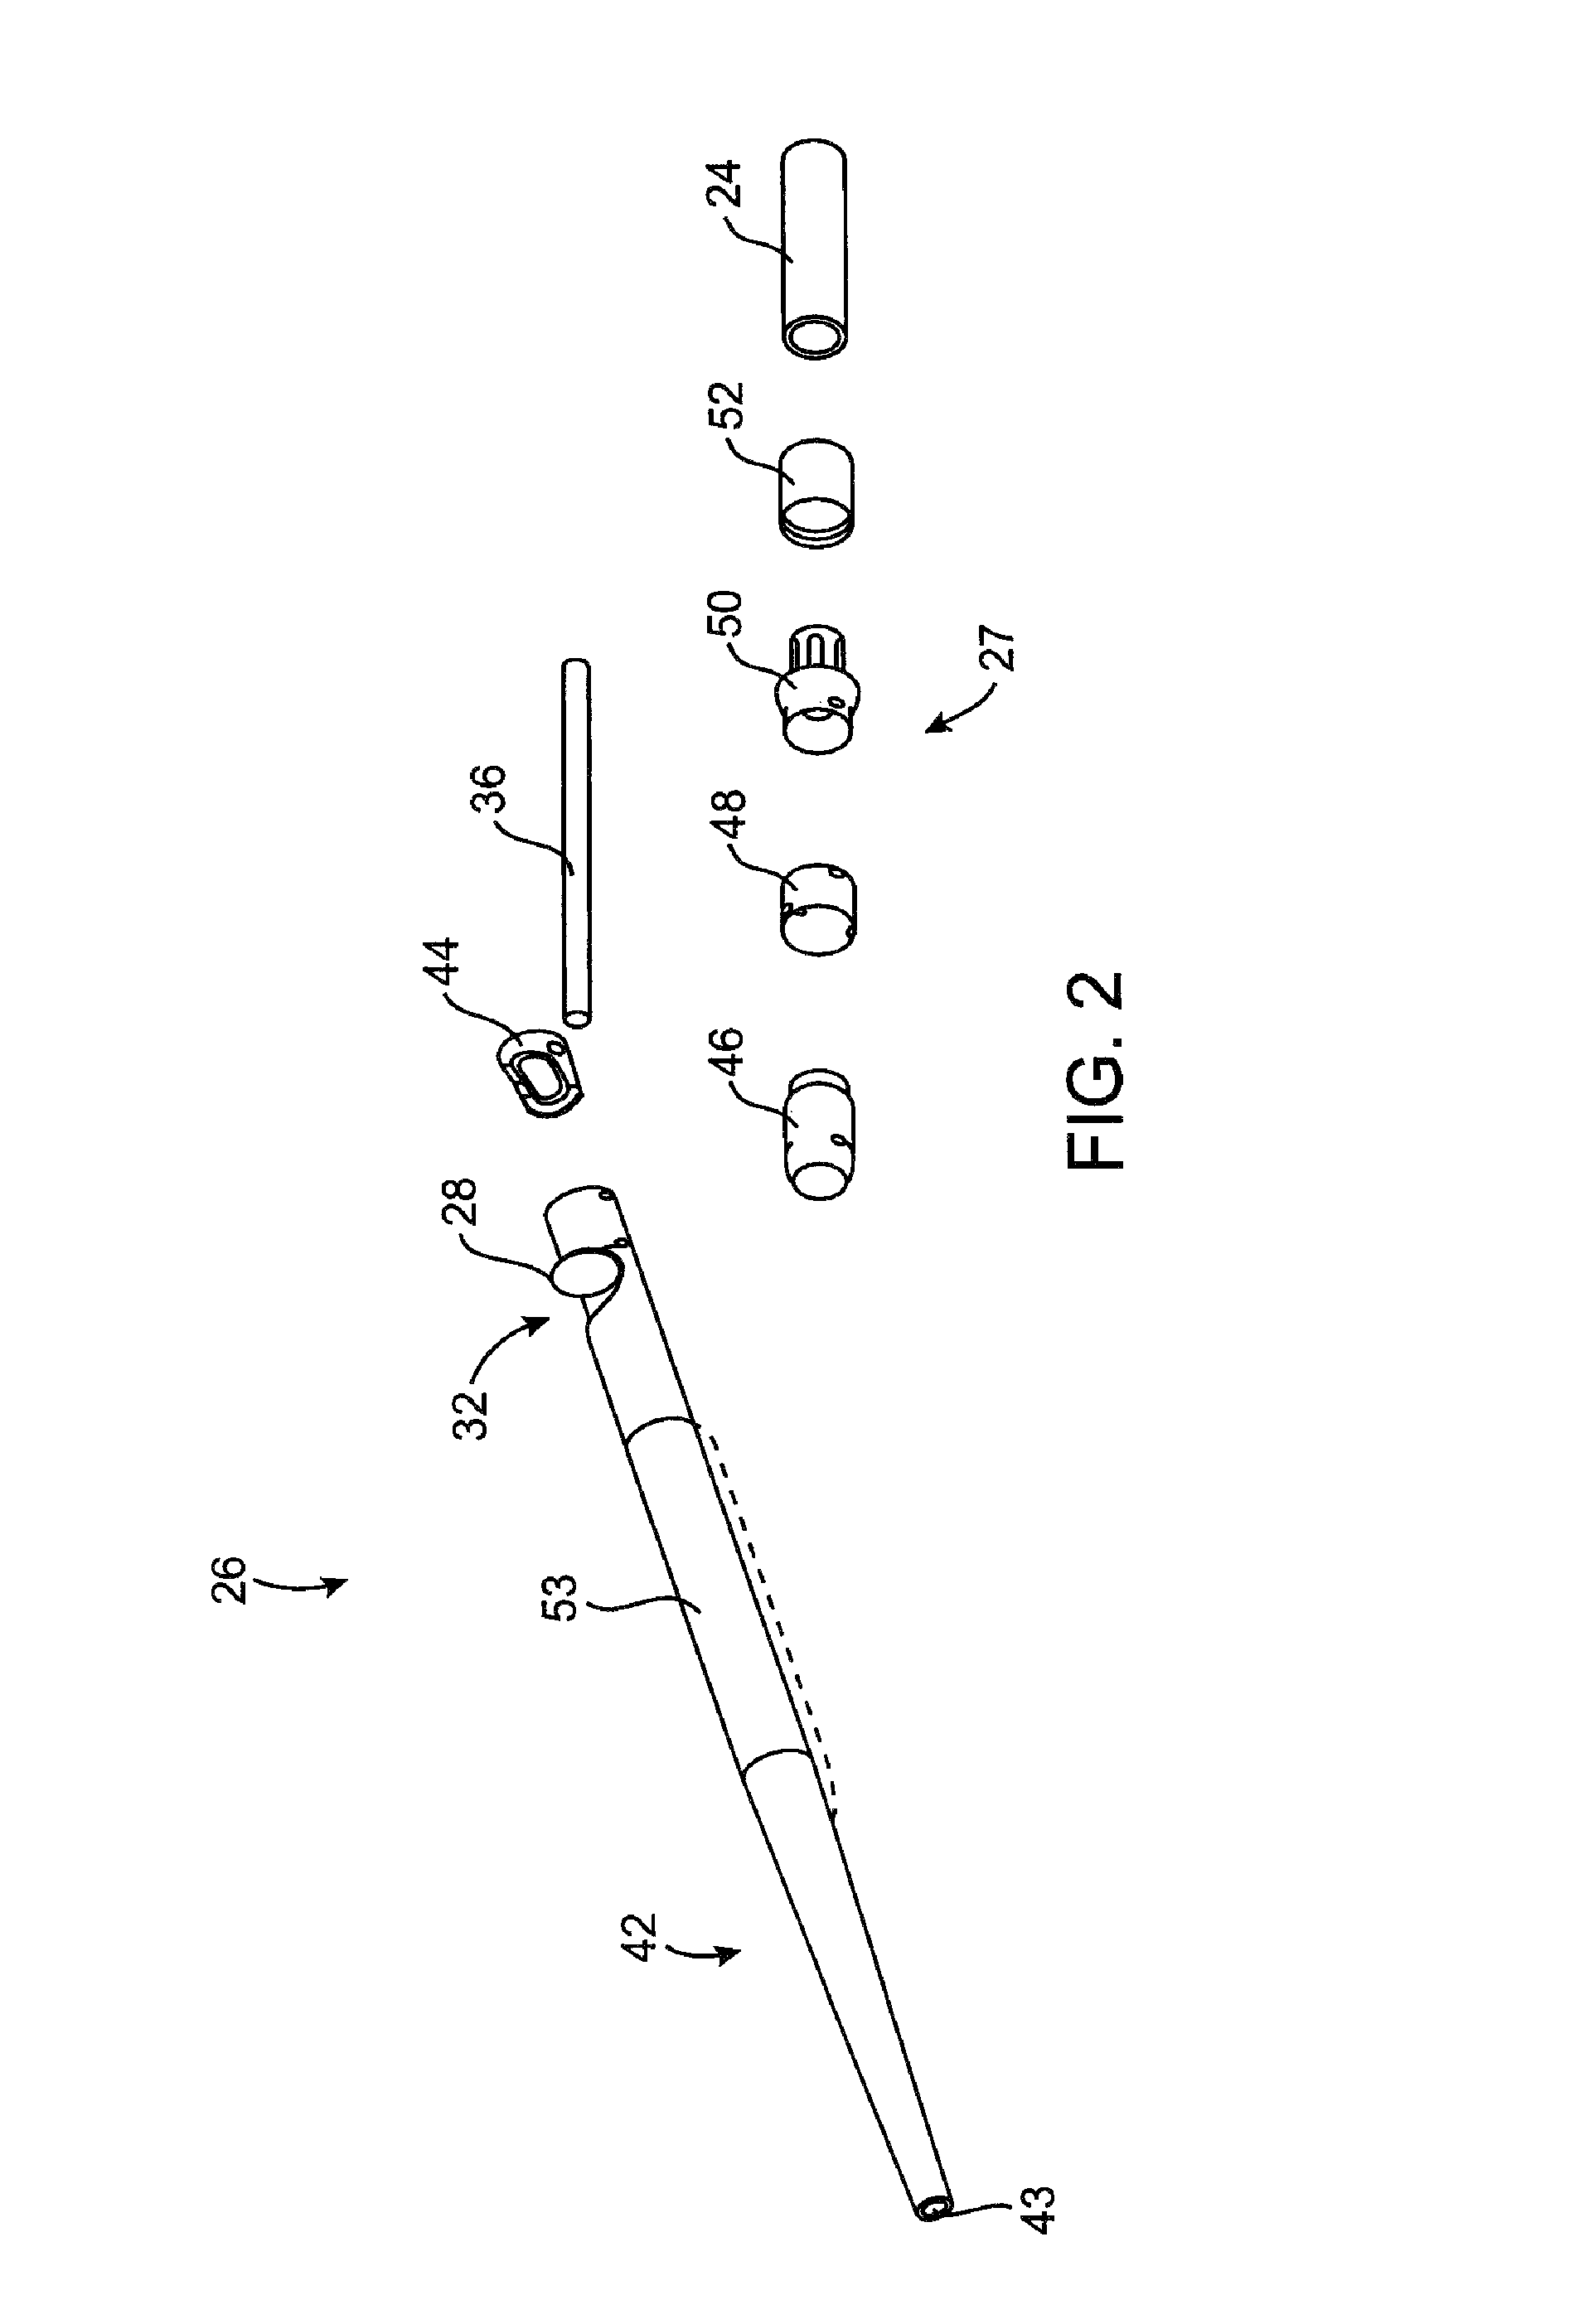 Methods and devices for removing material from a body lumen